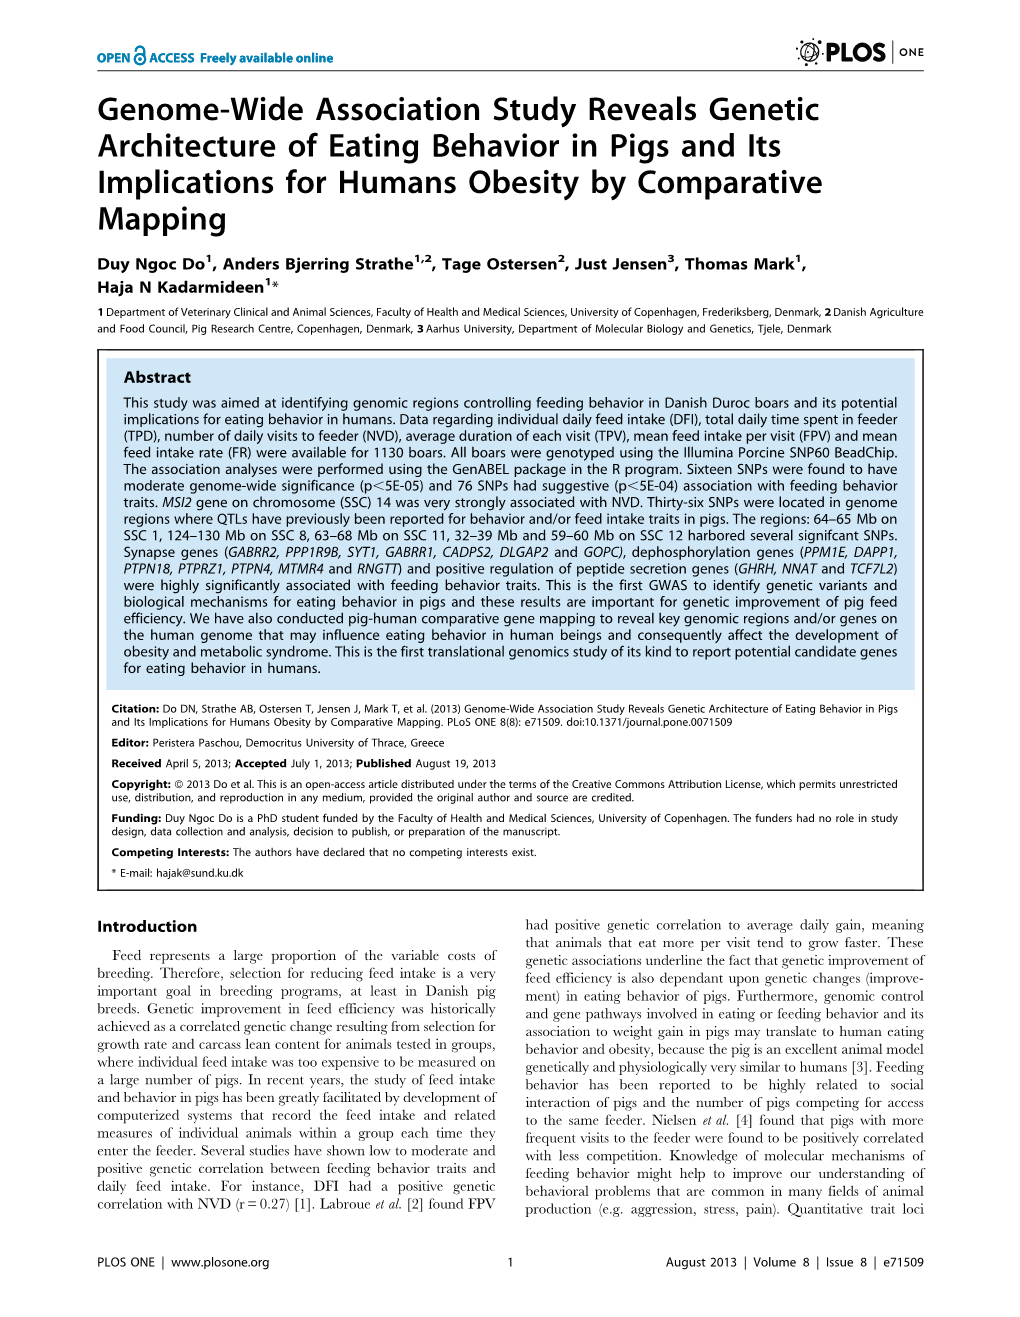 Genome-Wide Association Study Reveals Genetic Architecture of Eating Behavior in Pigs and Its Implications for Humans Obesity by Comparative Mapping